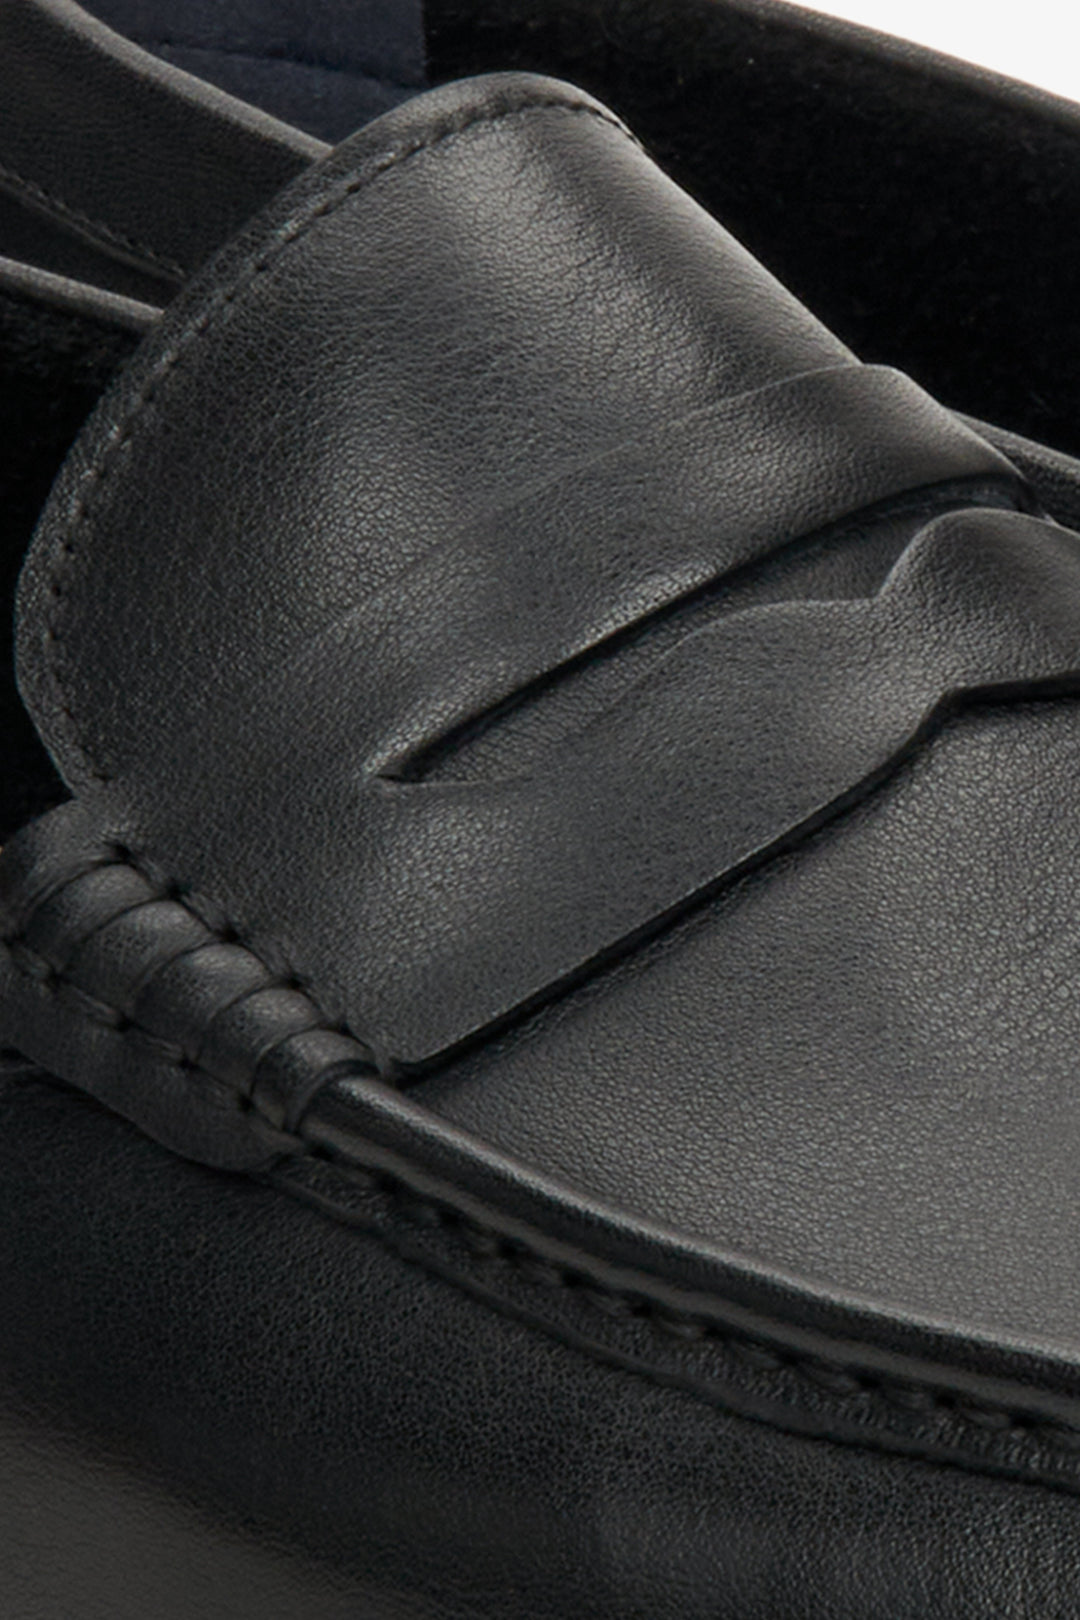 Estro men's black leather loafers for spring and autumn - close-up on the heel and side seam of the shoes.